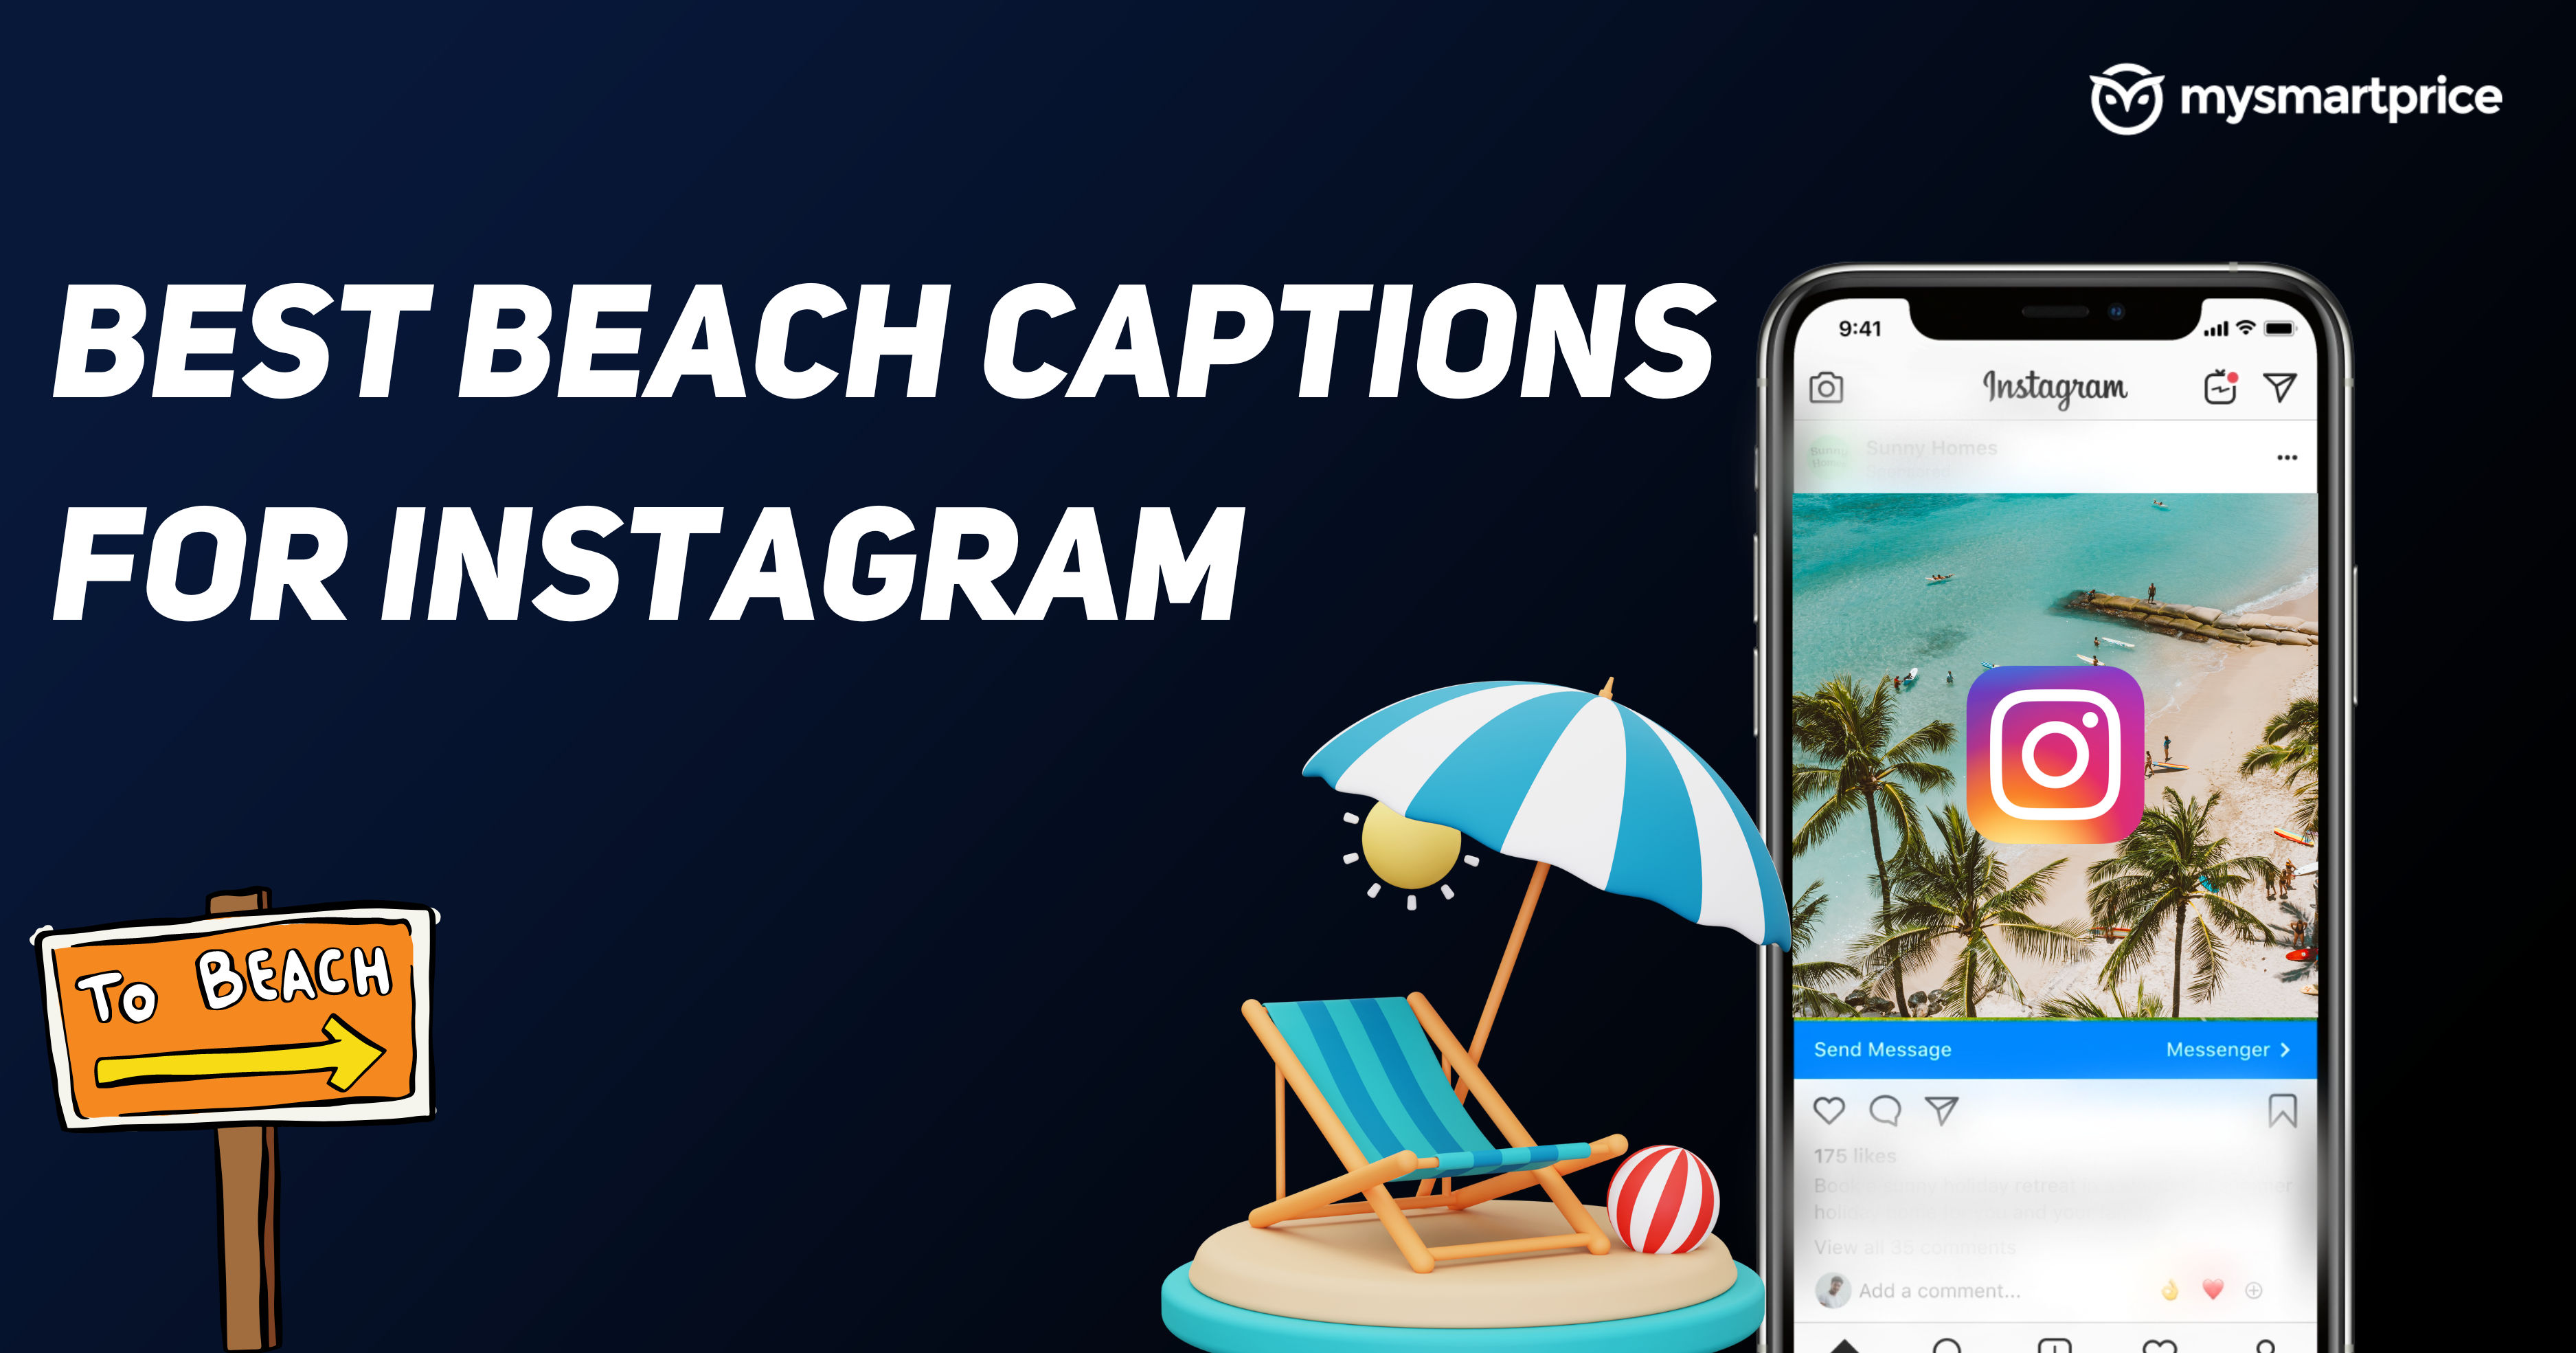 Captions for your outfit 💃🏻 | Instagram captions clever, Short instagram  quotes, Instagram post captions